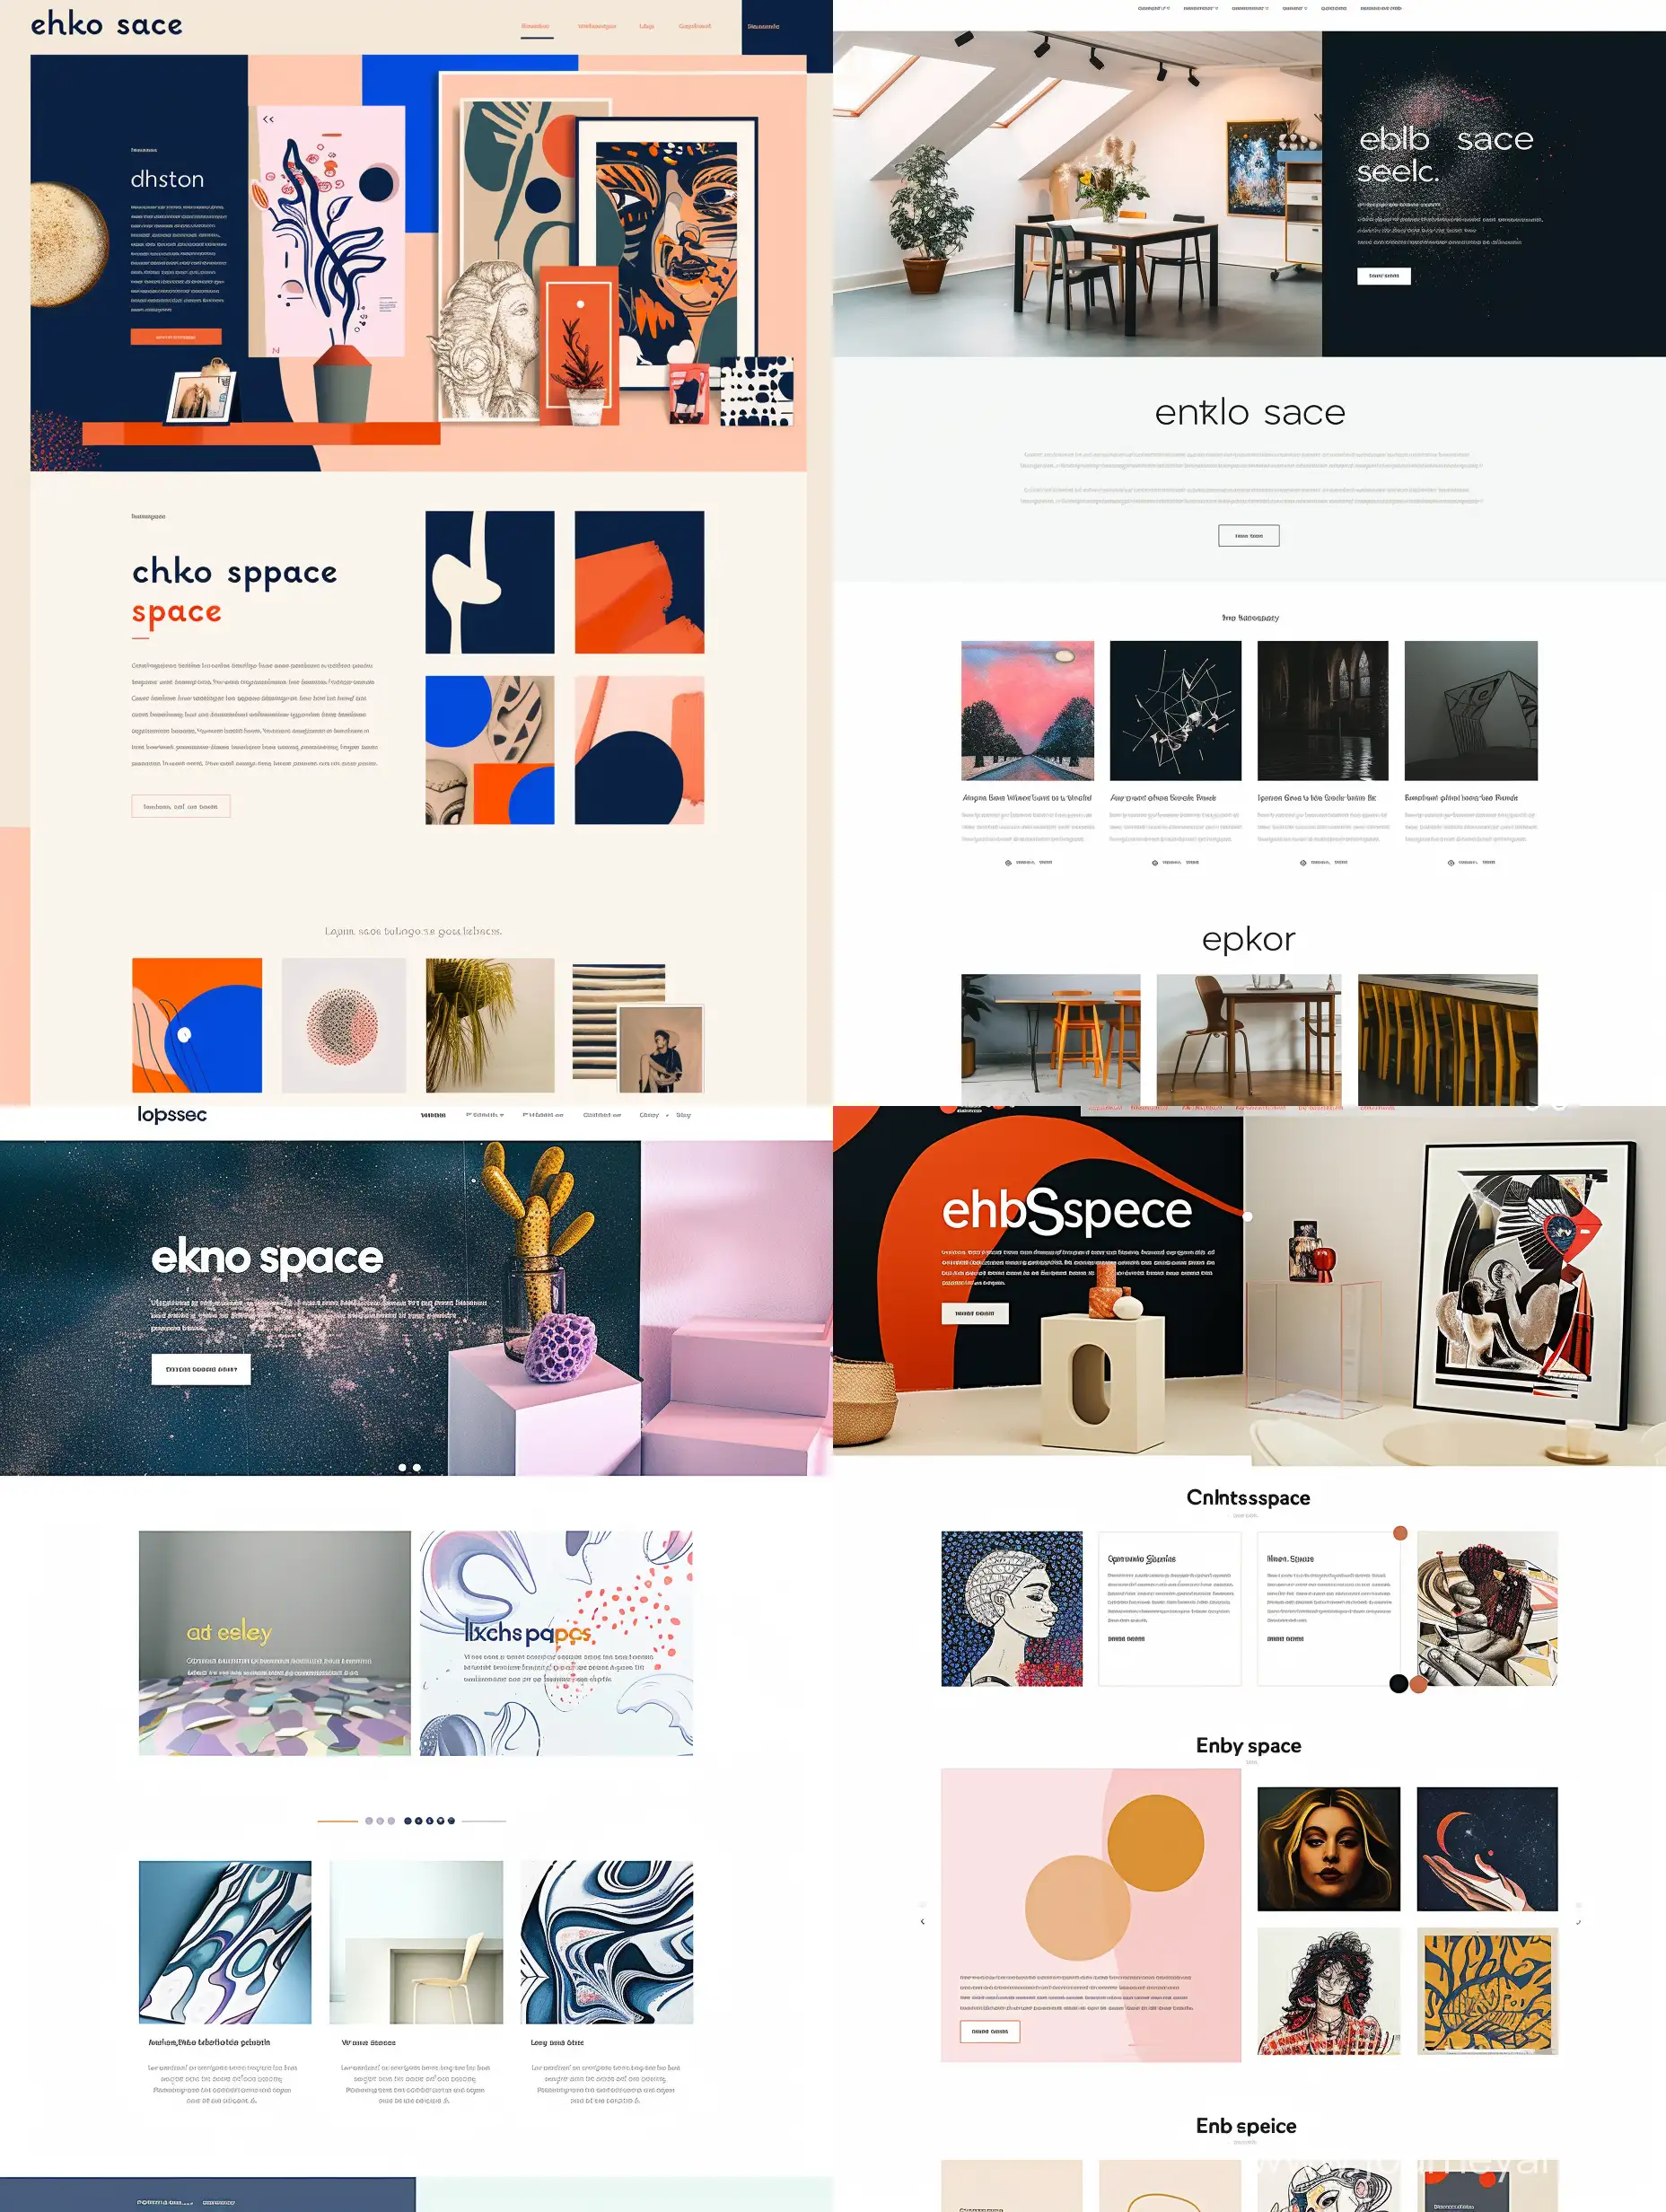 A homepage for a new groundbreaking art agency startup, empty space